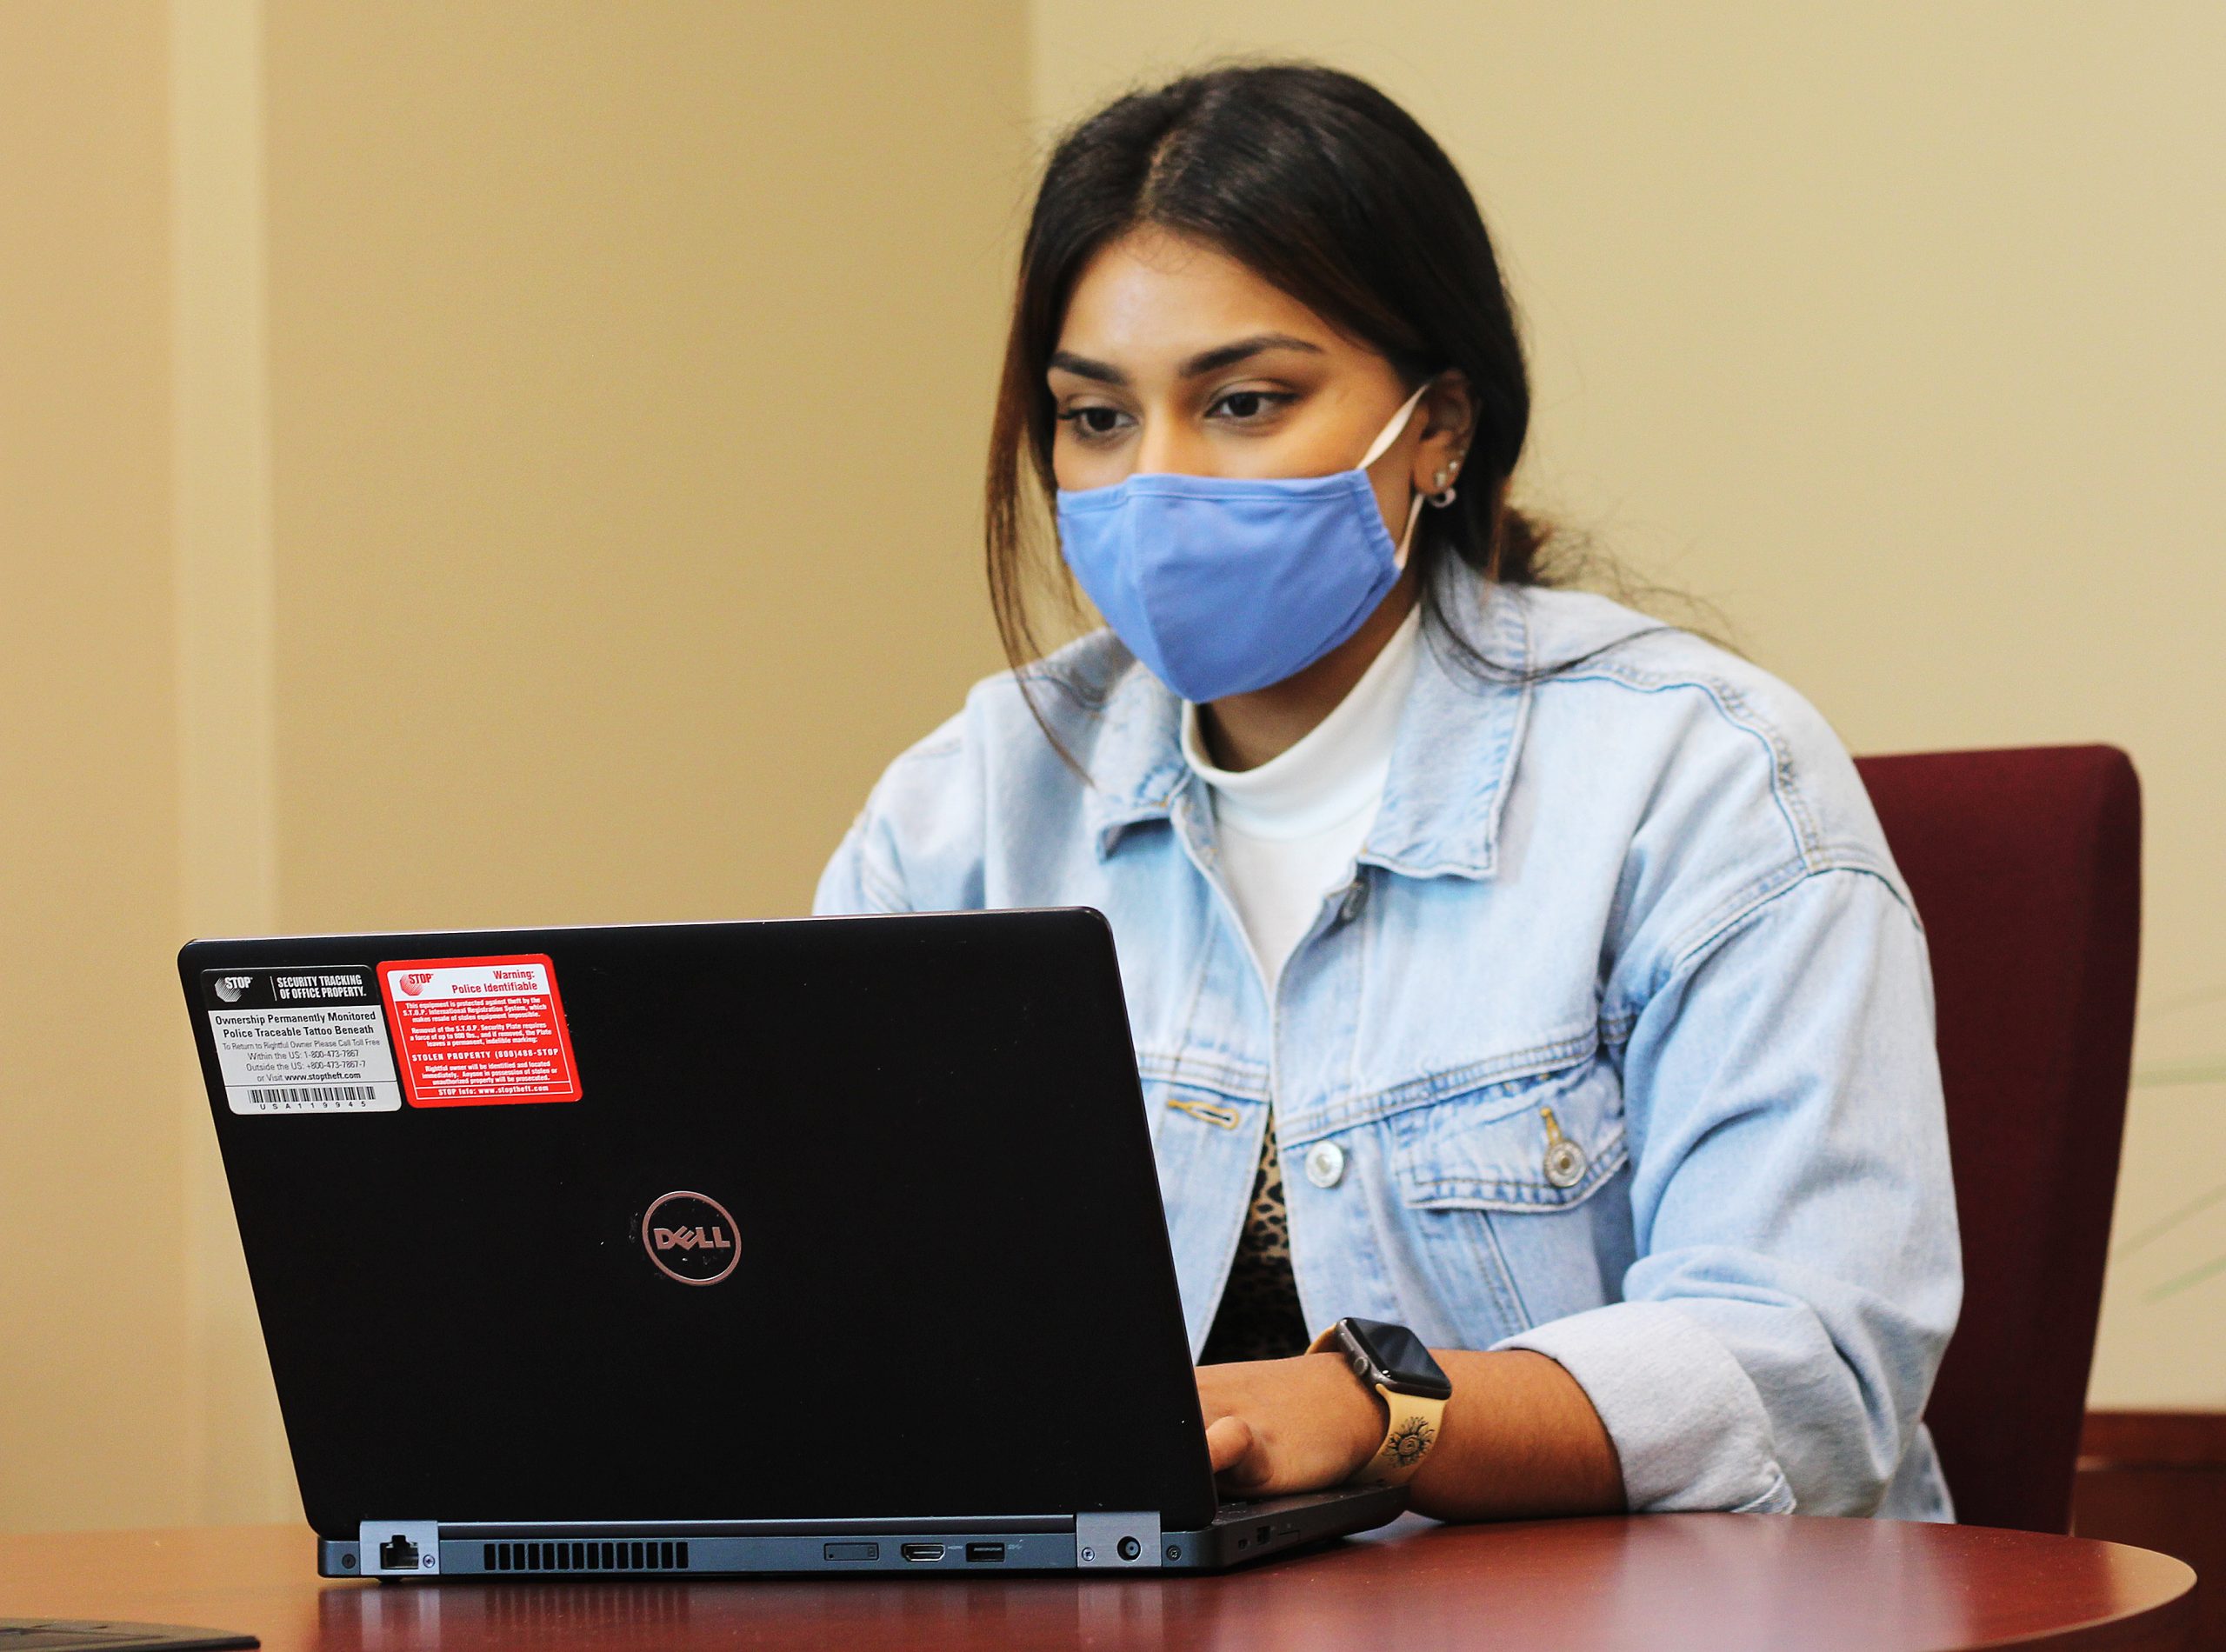 CARES Act provides campus loaner laptops